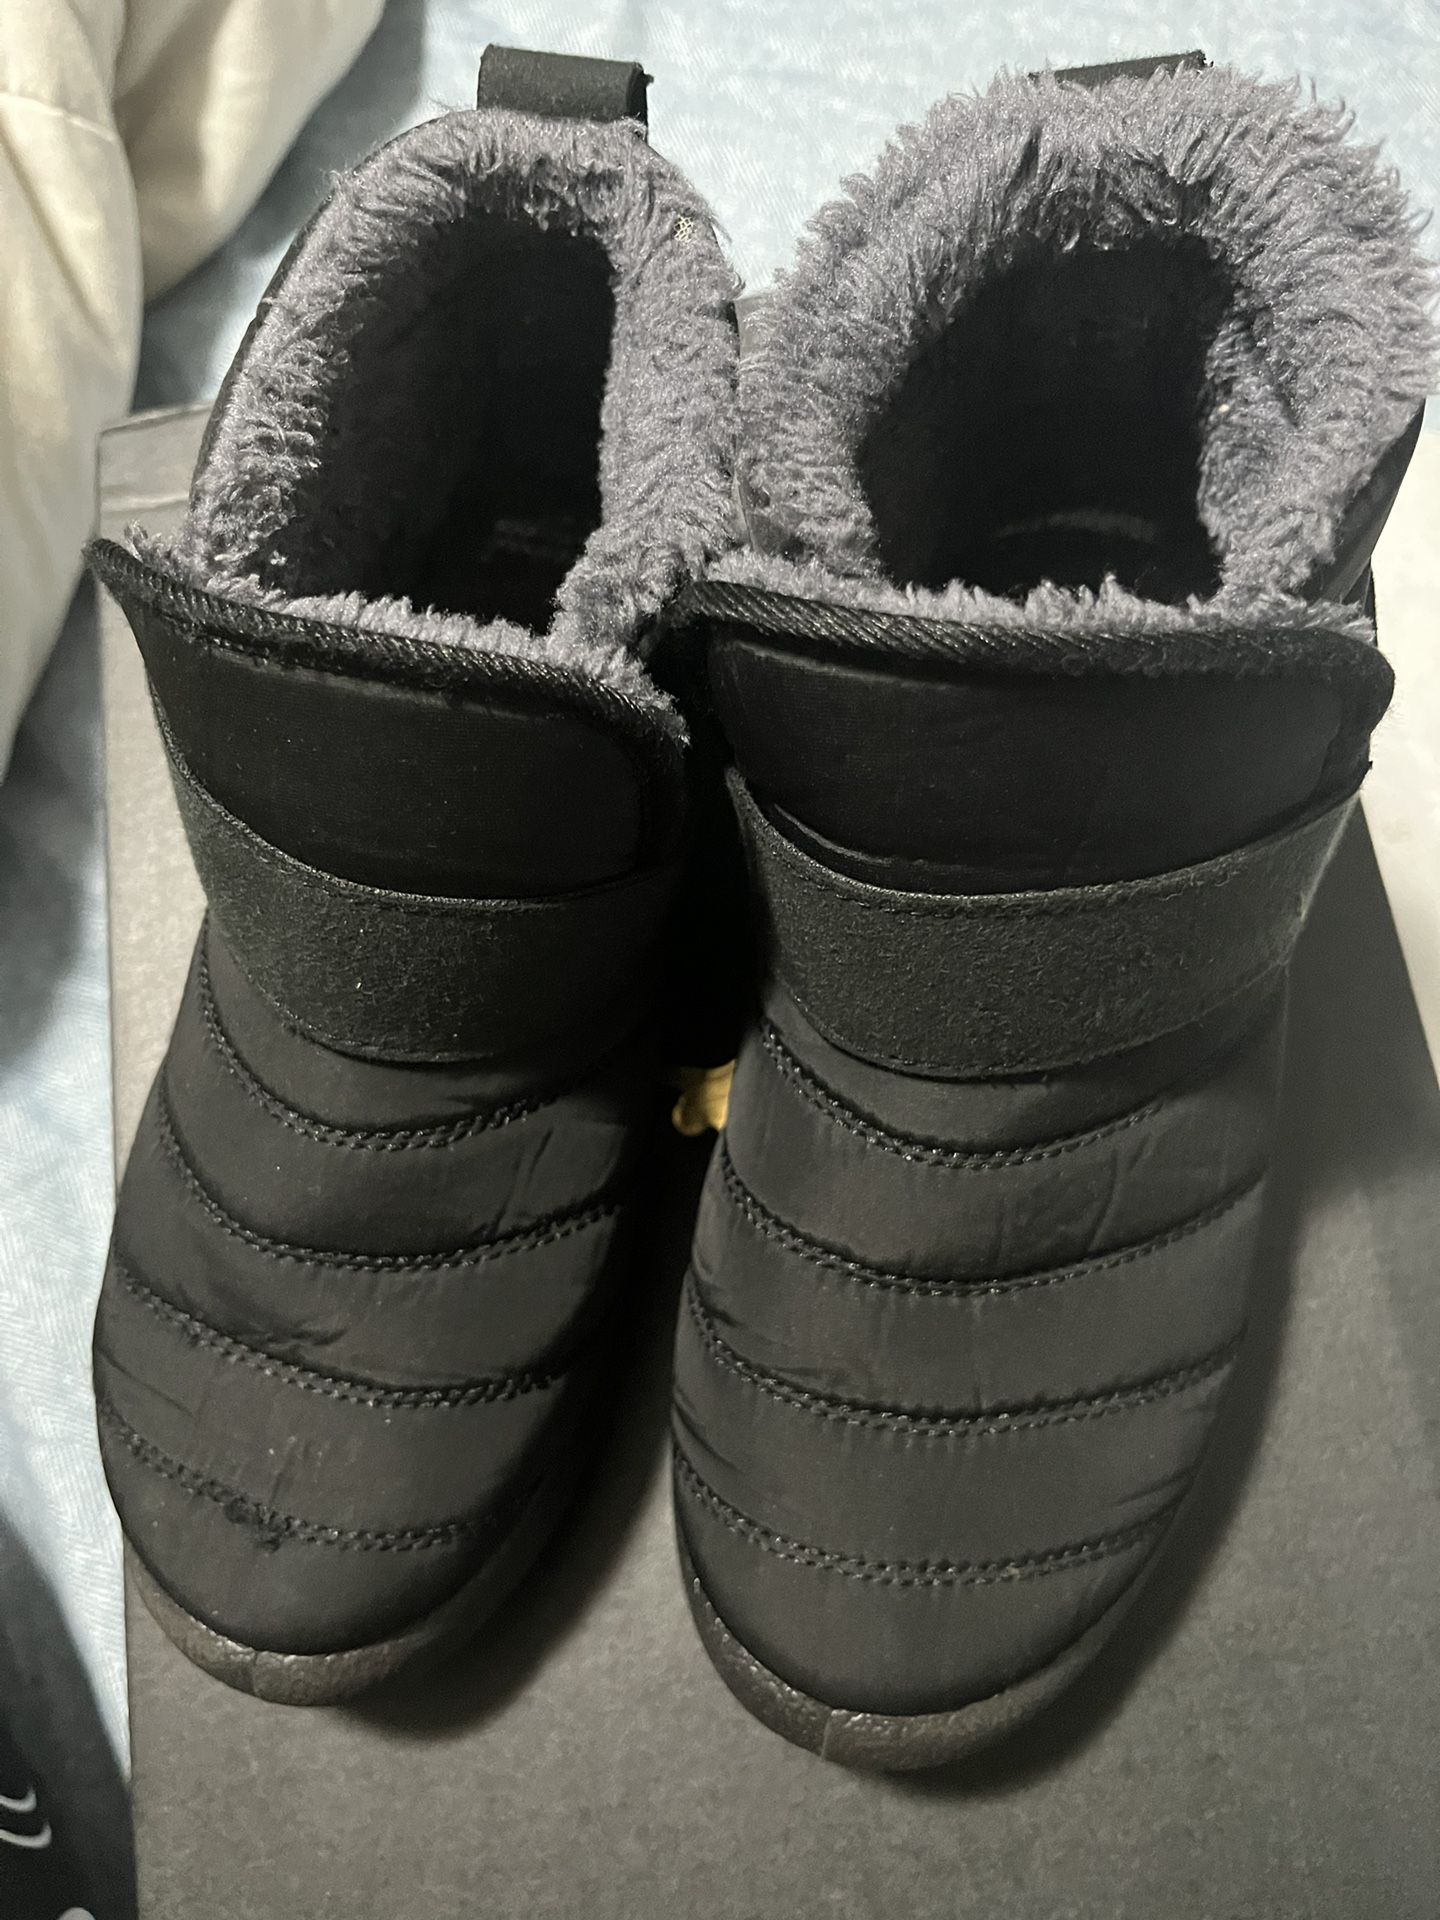 Boys Black With Grey Fur Inside Boots Size 1.5 